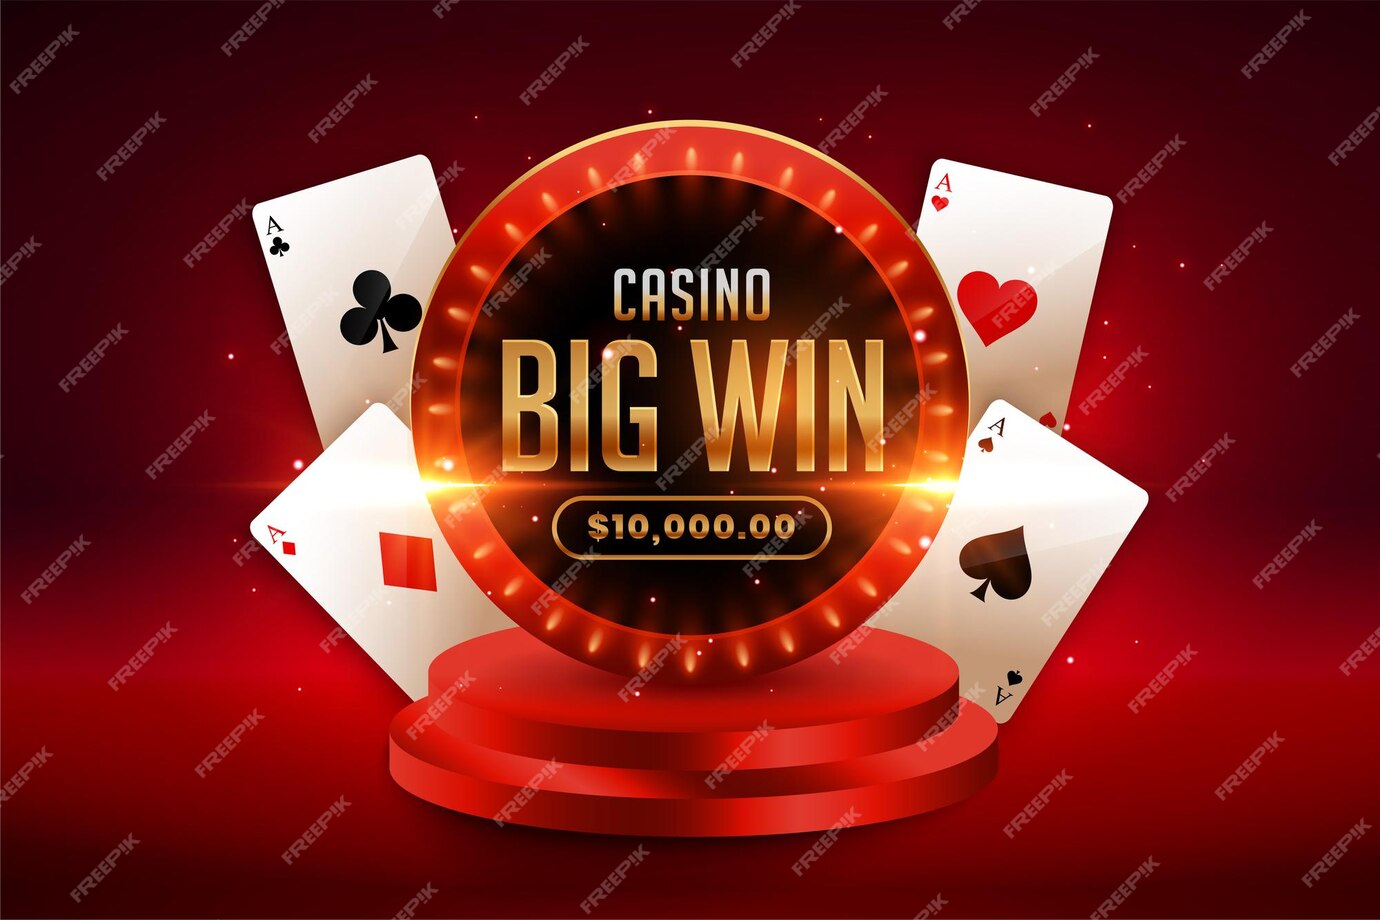 big win casino background with playing cards 1017 30137